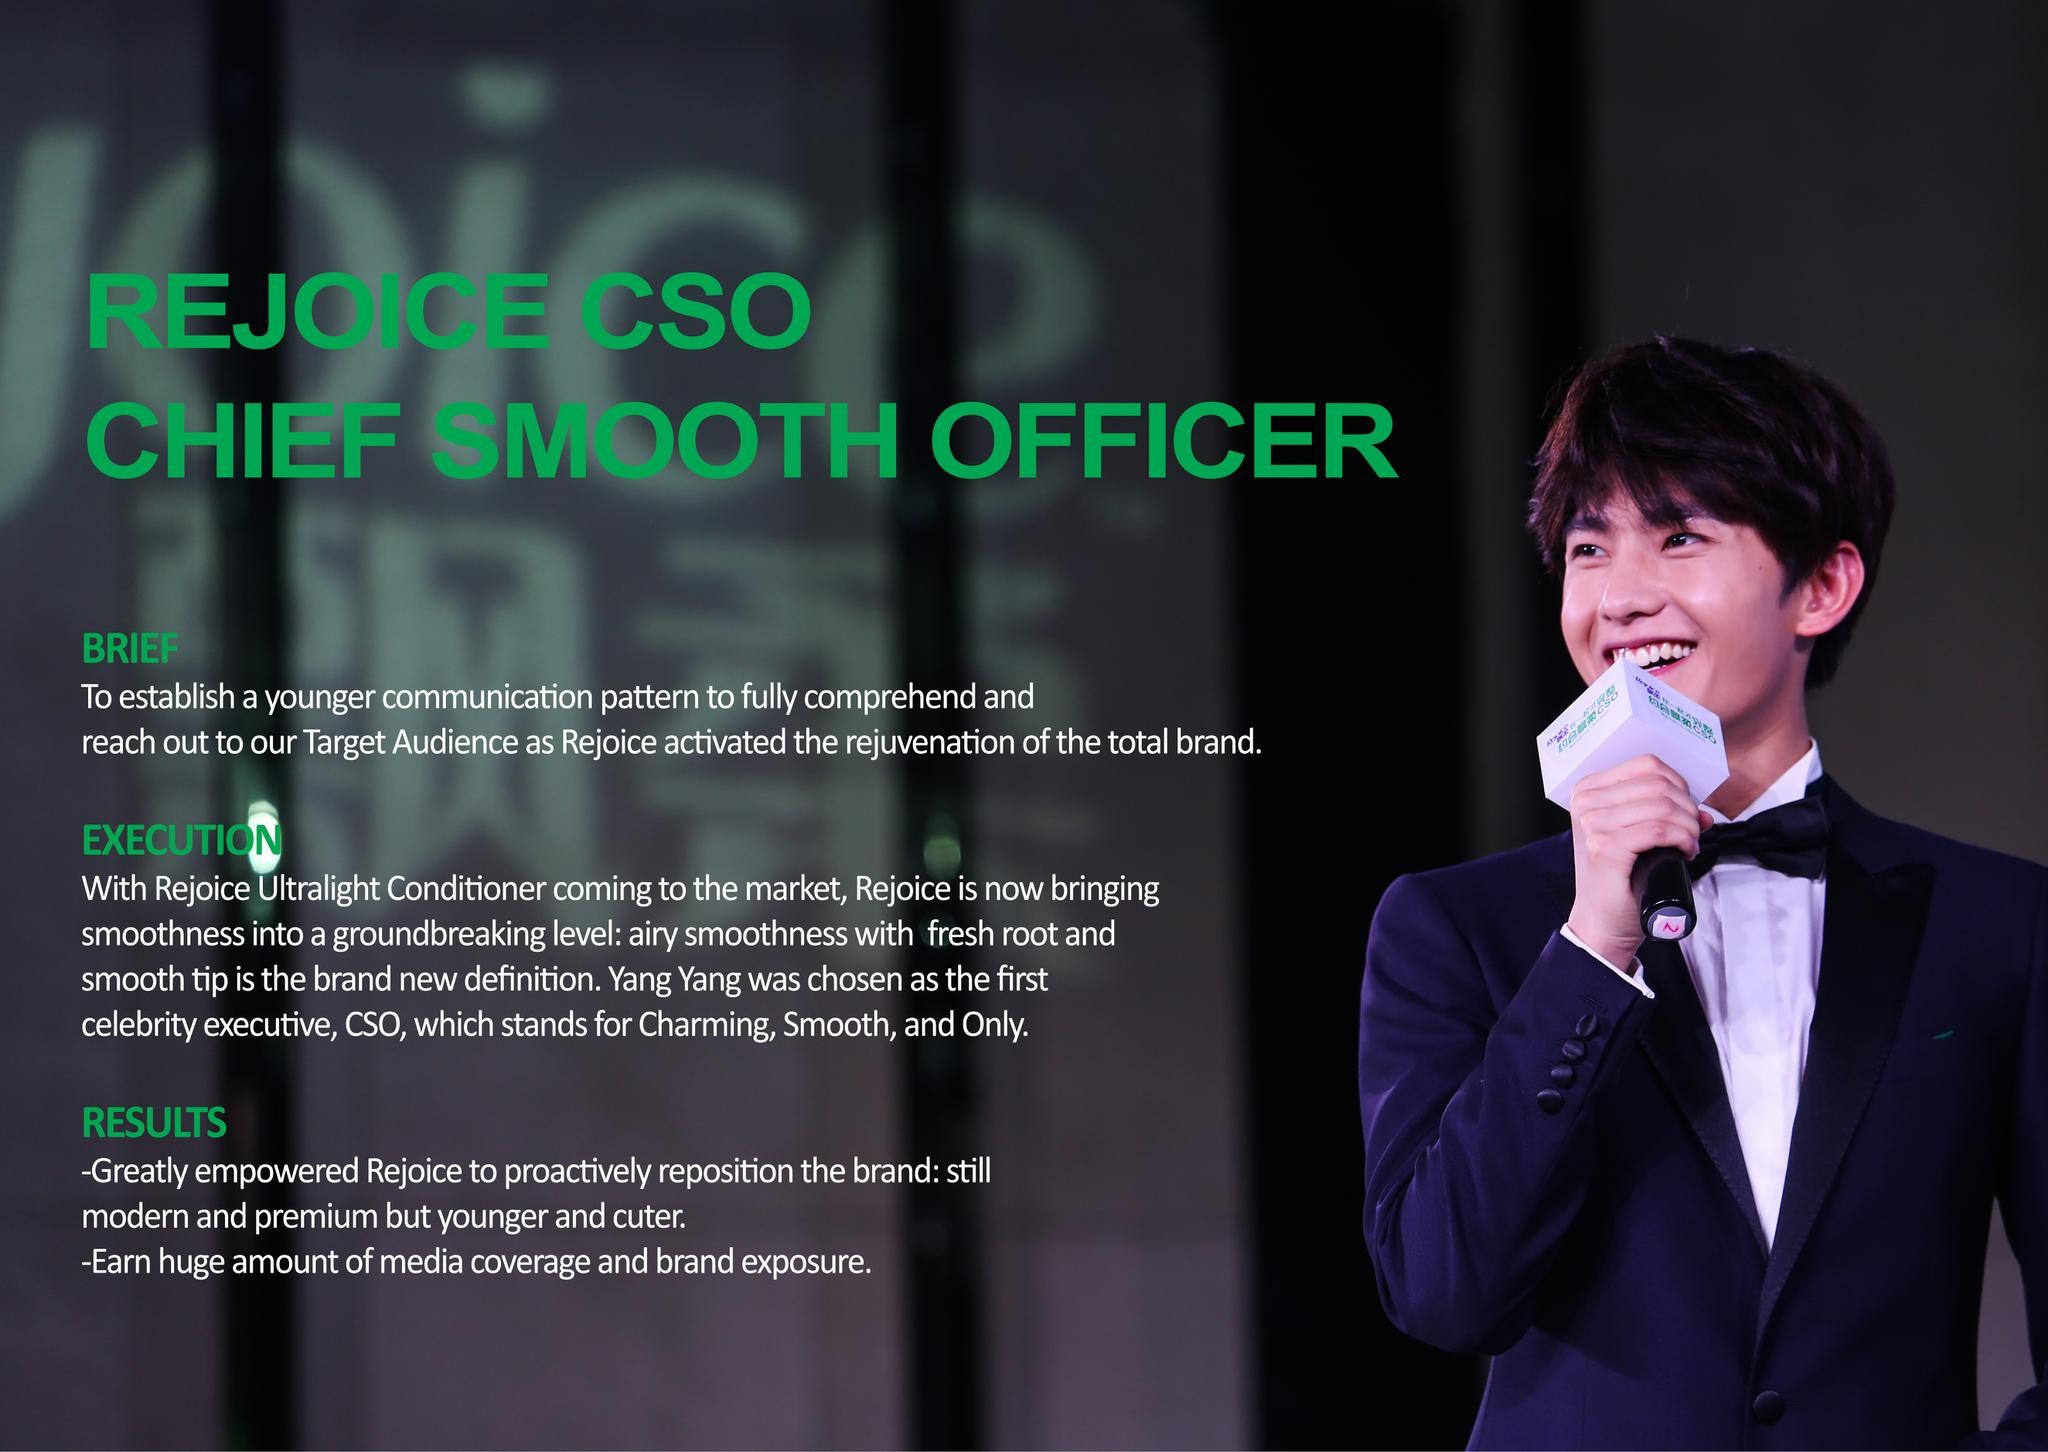 Rejoice CSO 'Chief Smooth Officer" Launch Event